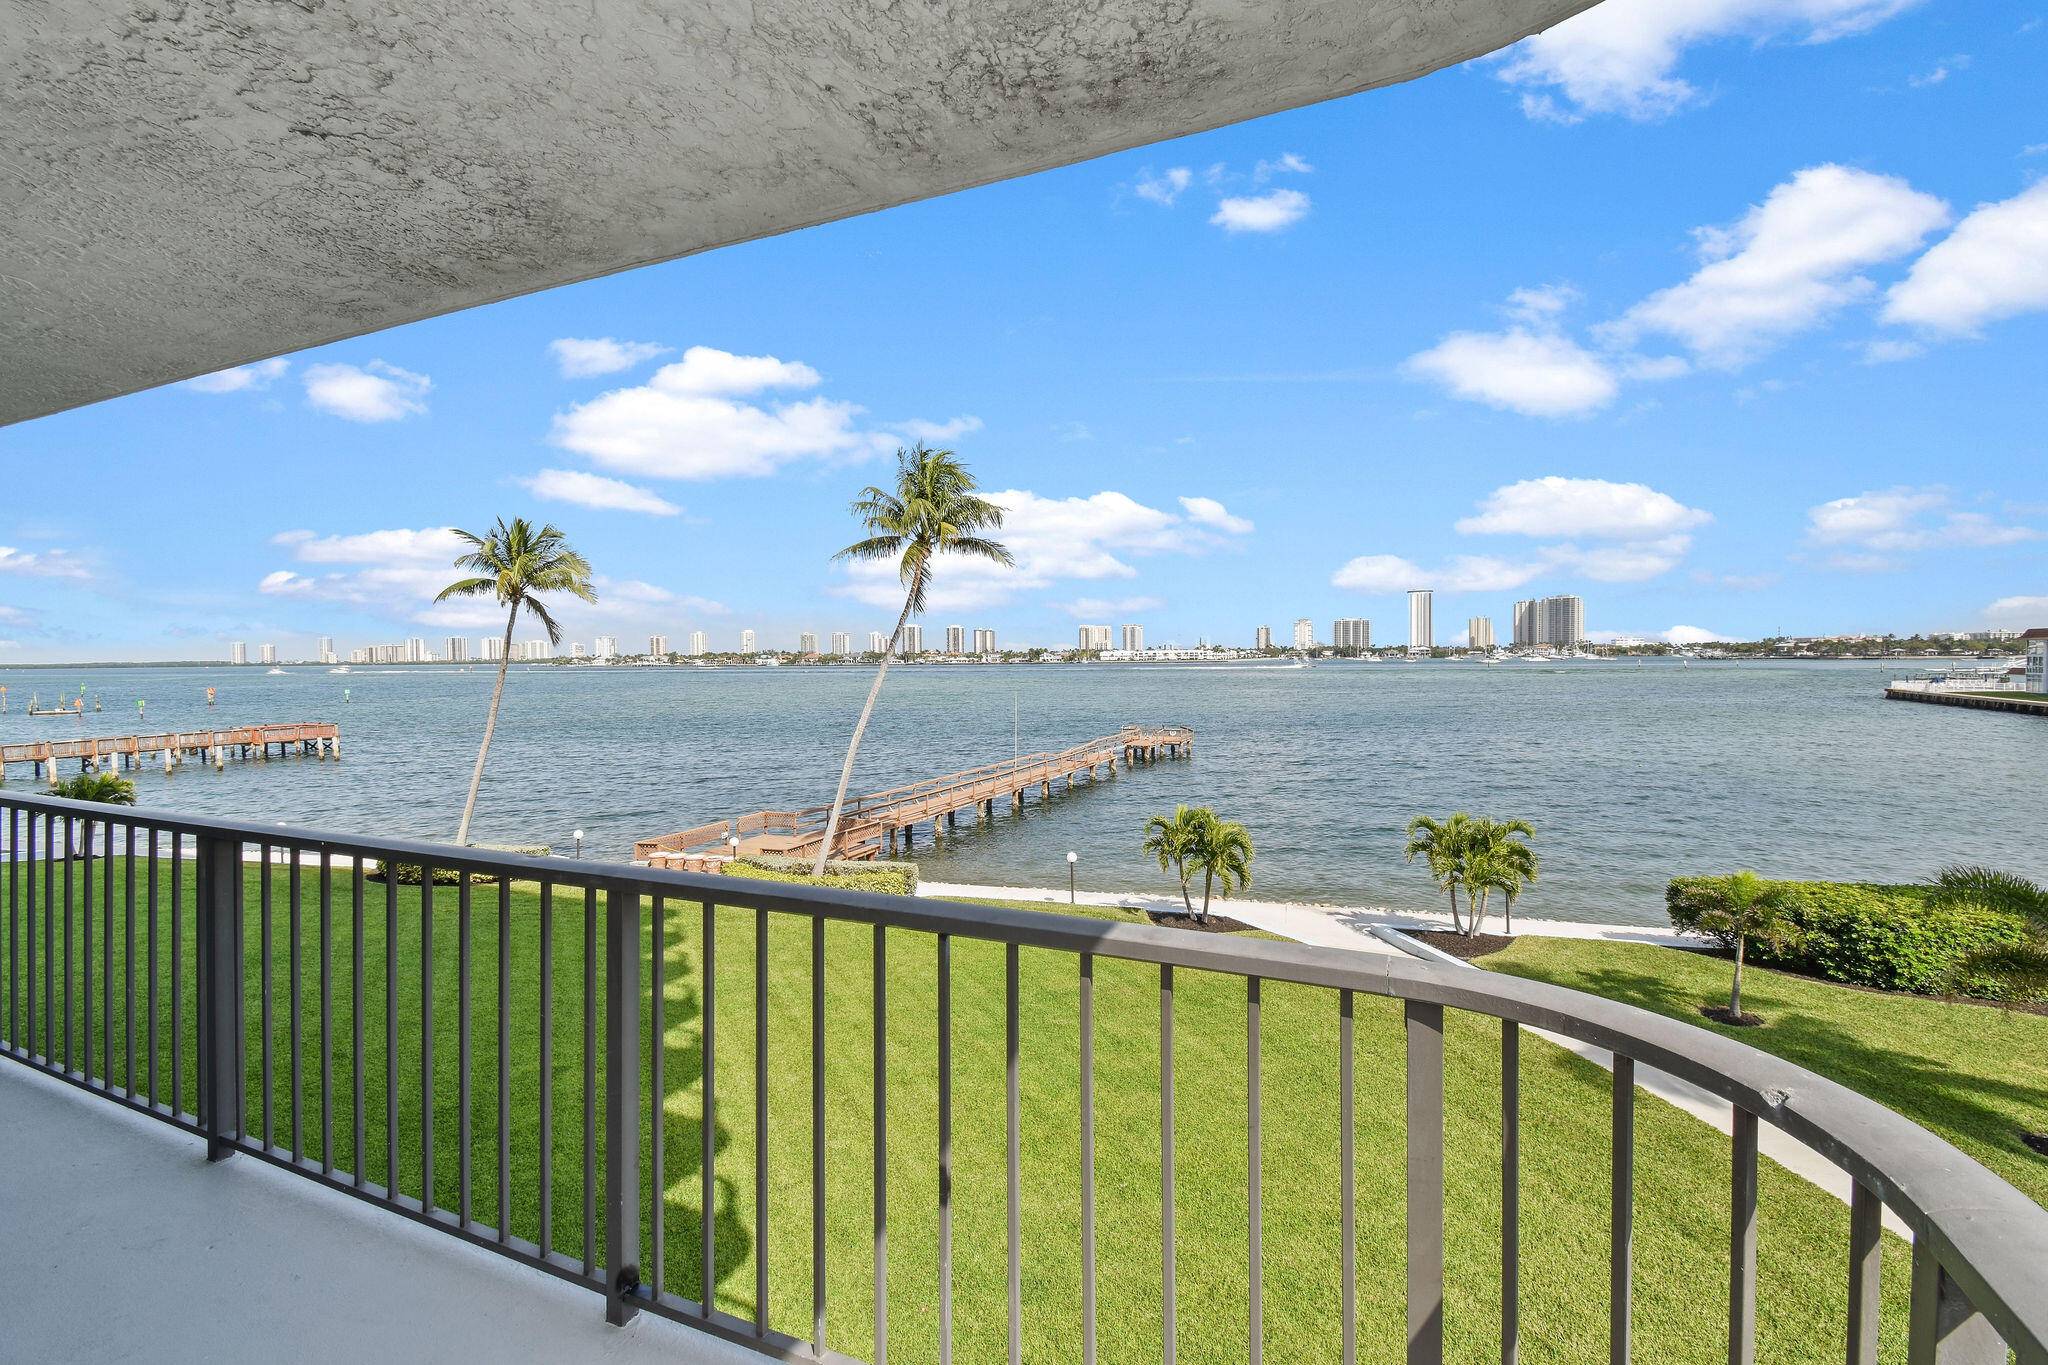 FROM YOUR 100 FT WRAP AROUND BALCONY ENJOY BREATHTAKING WATERFRONT VIEWS.